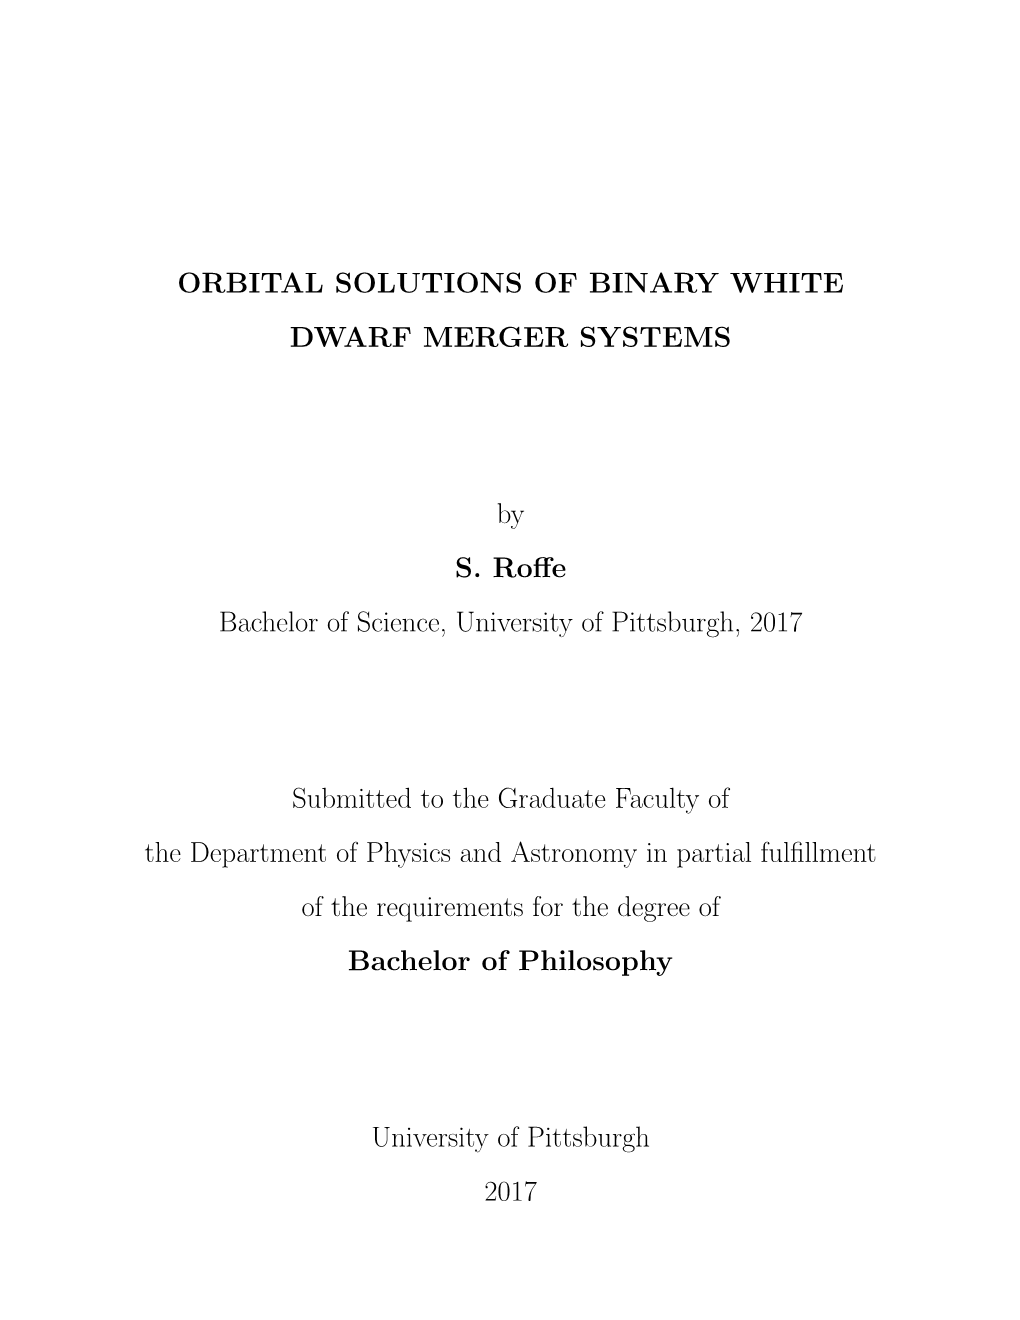 Orbital Solutions of Binary White Dwarf Merger Systems